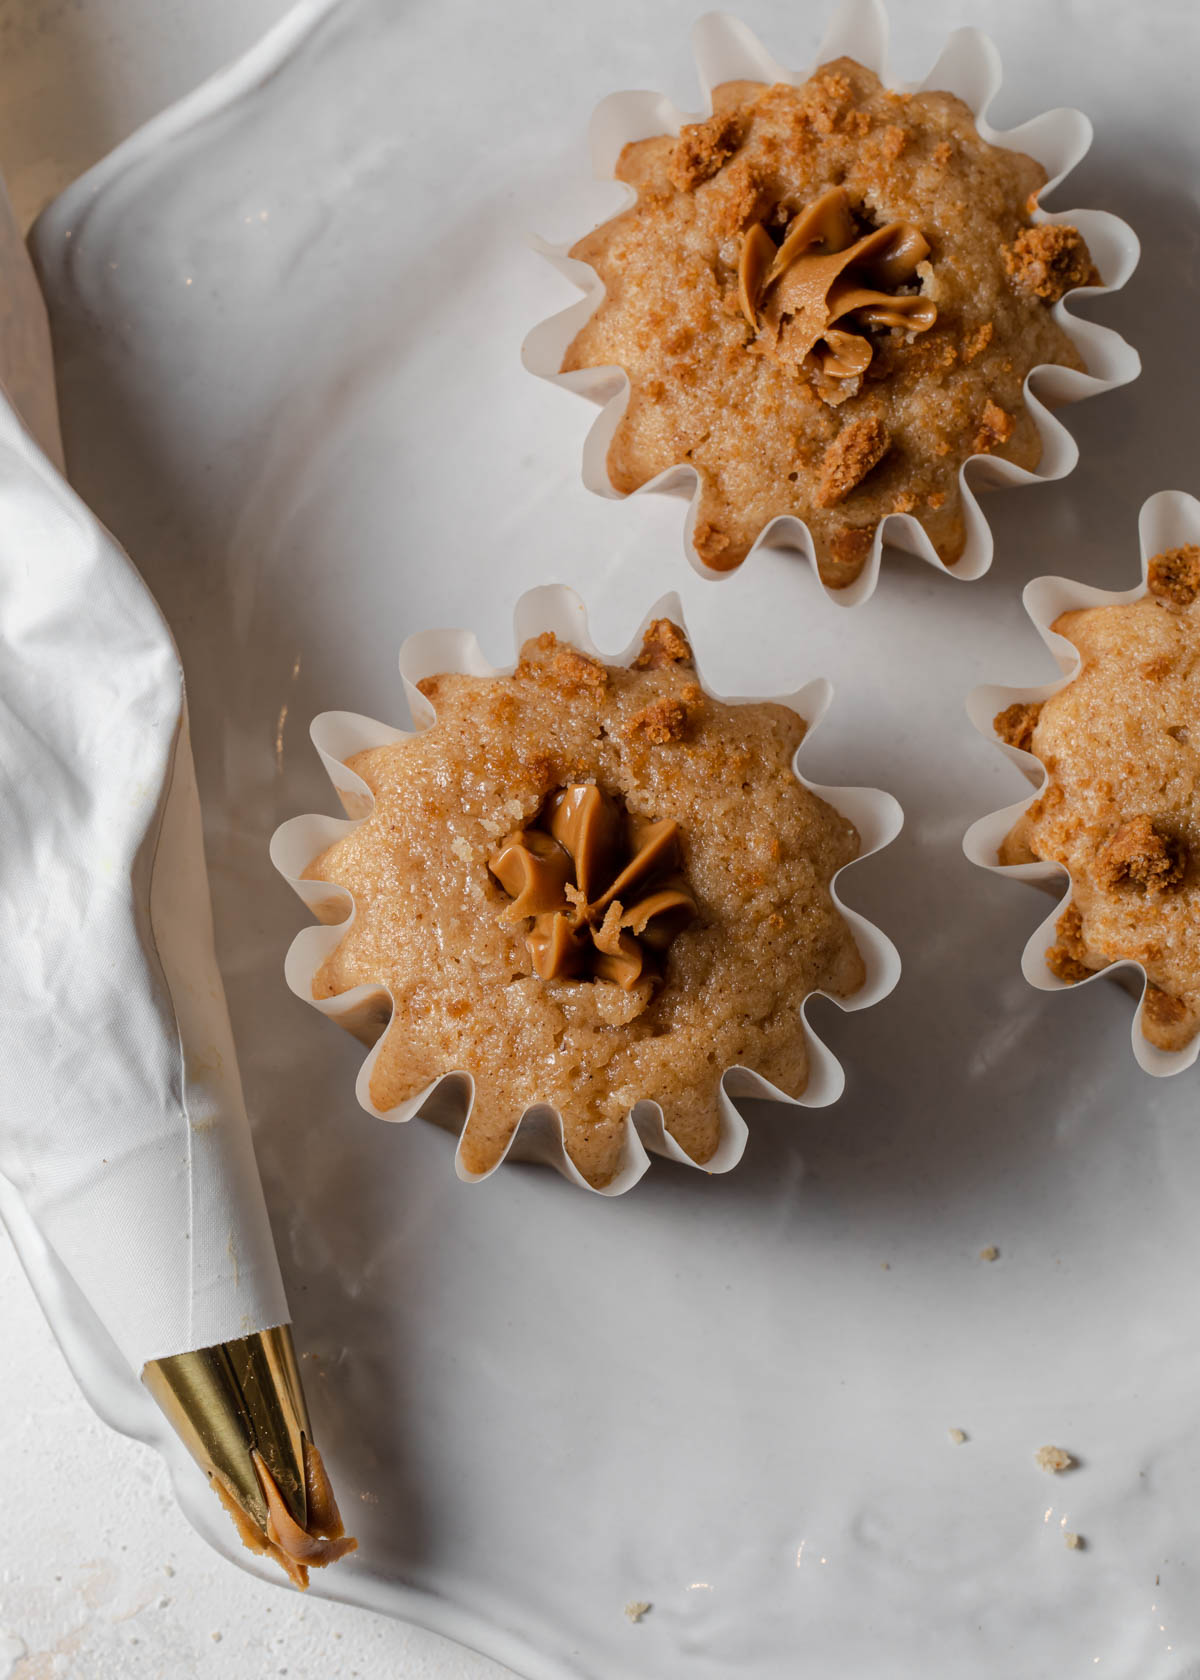 Fill cupcakes with a piping bag of cookie butter spread